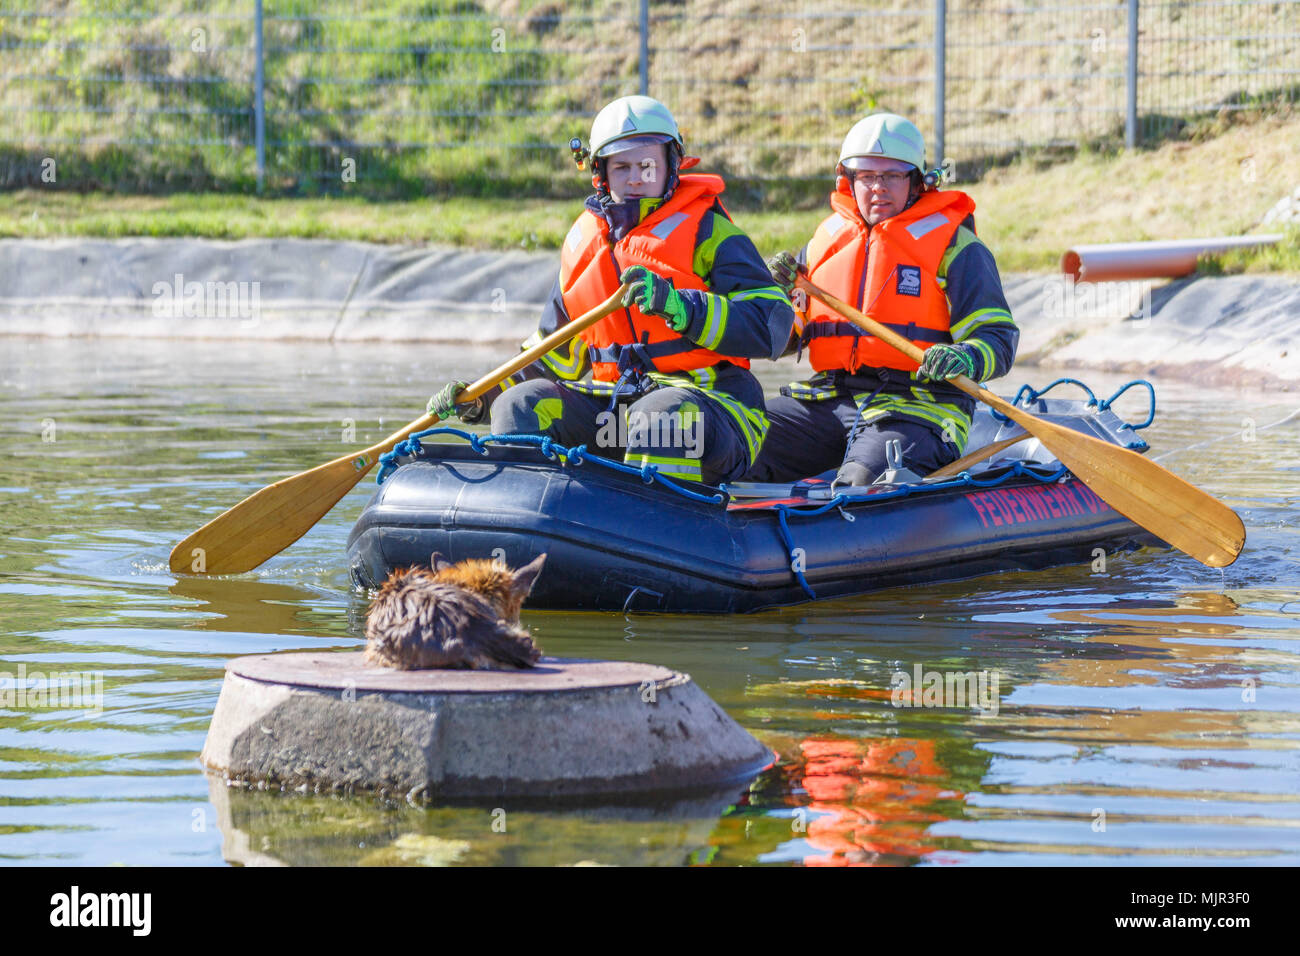 Oelsnitz, Germany, 06 May 2018. Two firefighters approach a fox lying on a manhole cover in an irrigation pool. Since the pool is currently not completely full, the fox was unable to climb out over the smooth pond liner. Photo: Jens Uhlig/Jens Uhlig/dpa Credit: dpa picture alliance/Alamy Live News Stock Photo